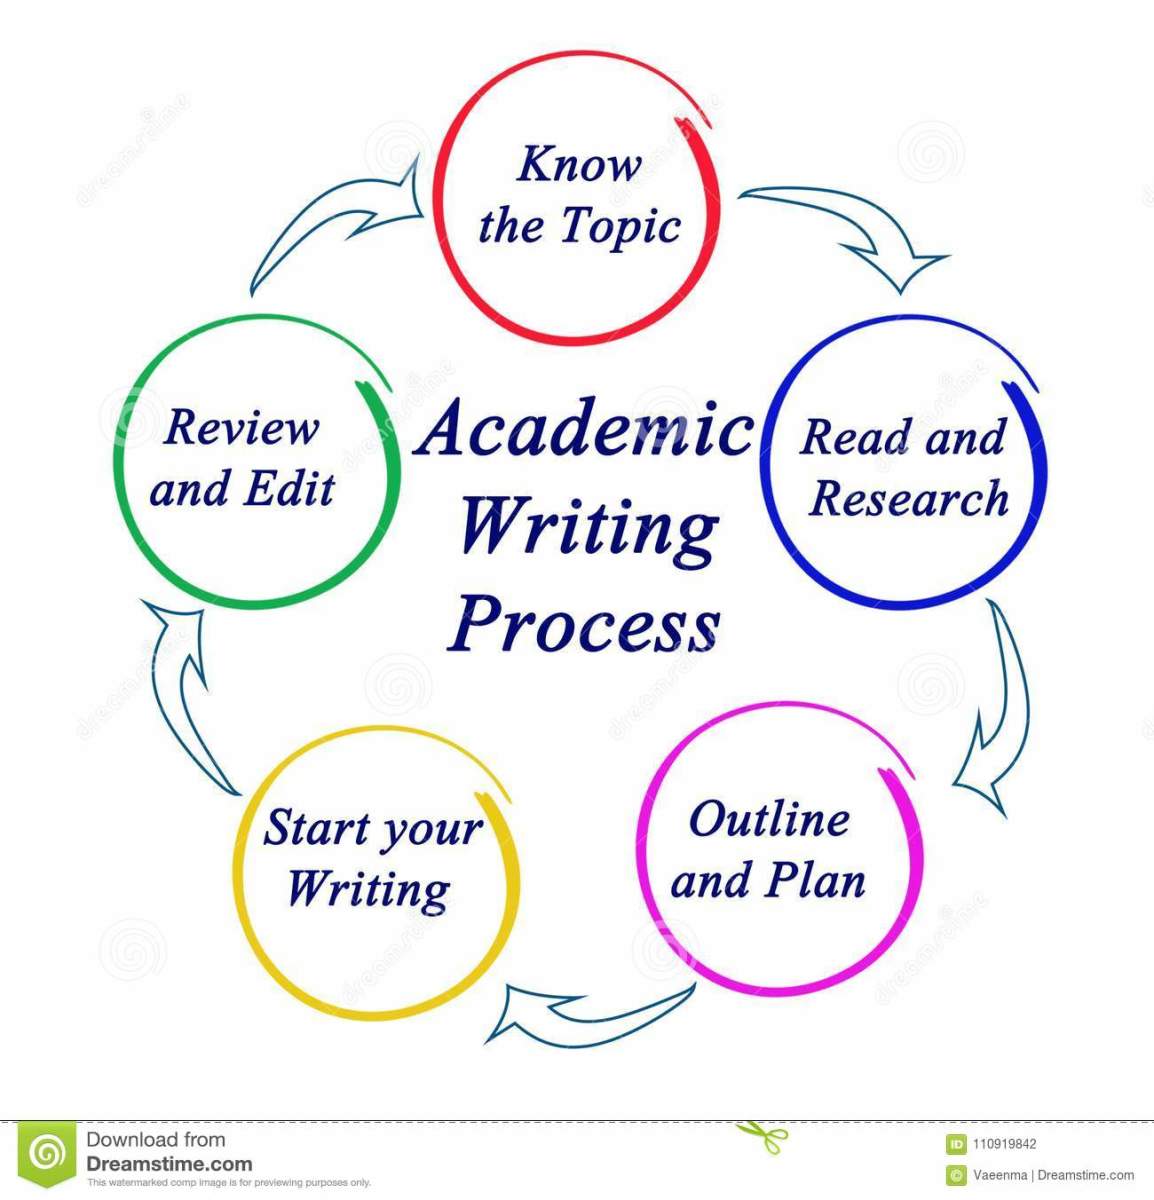 Skills to Learn in Academic Writing